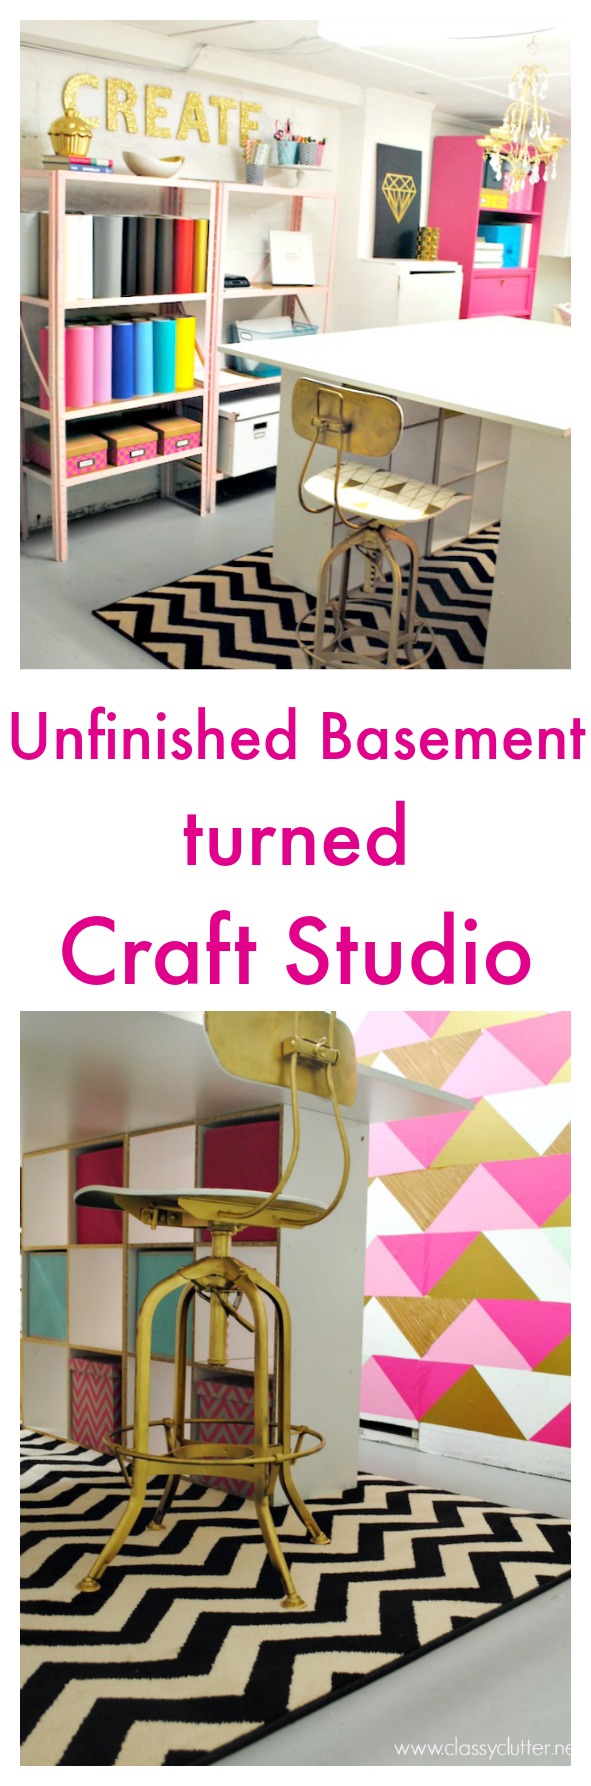 The Best Craft Vinyl Storage And A Giveaway